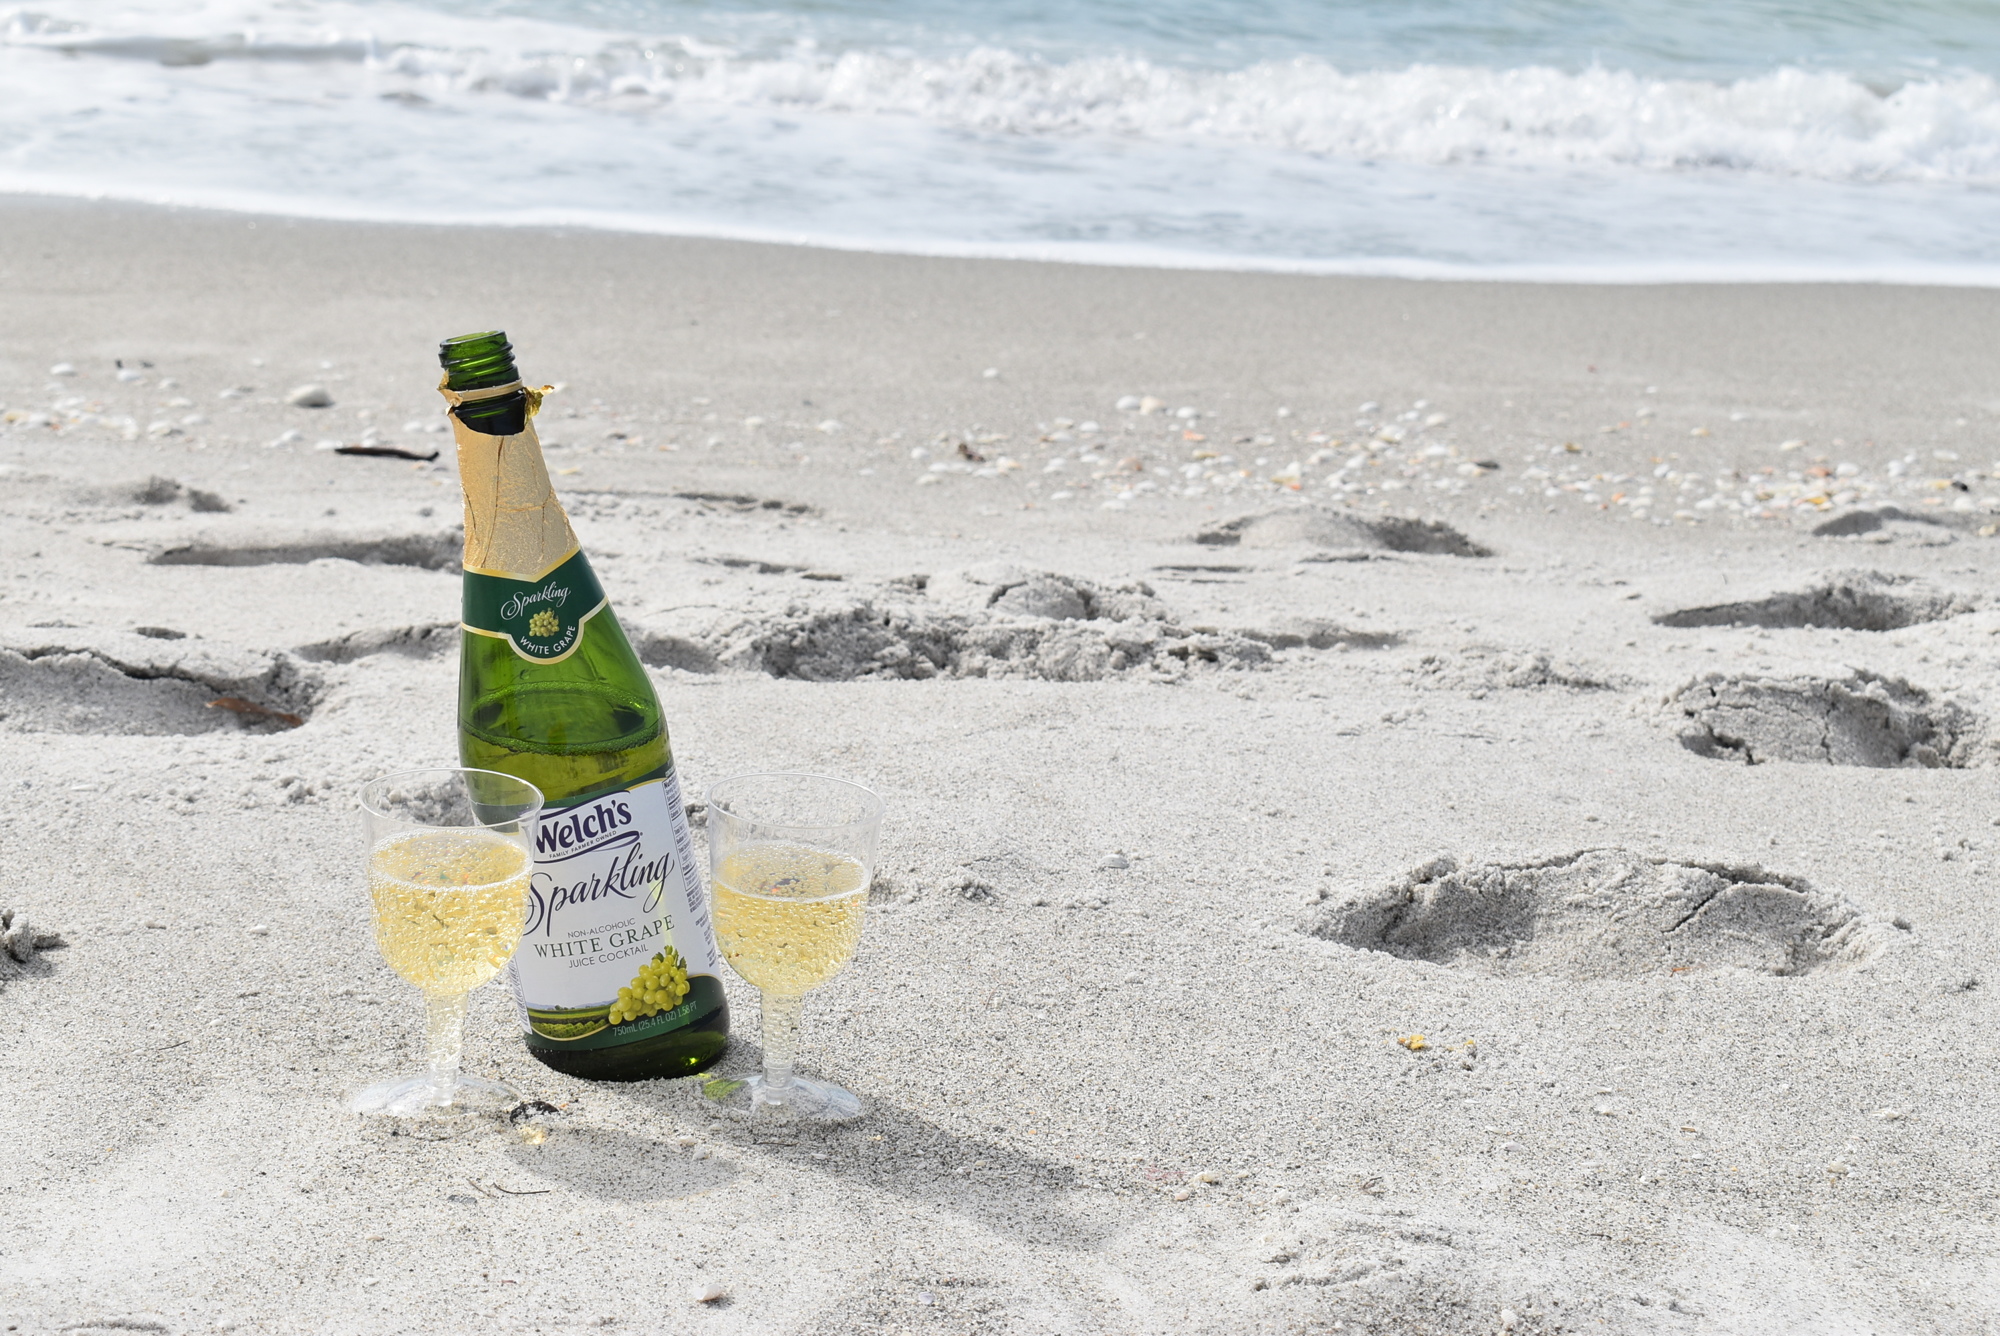 No alcohol, no problem. Go bubbly without the booze on Longboat's beaches.